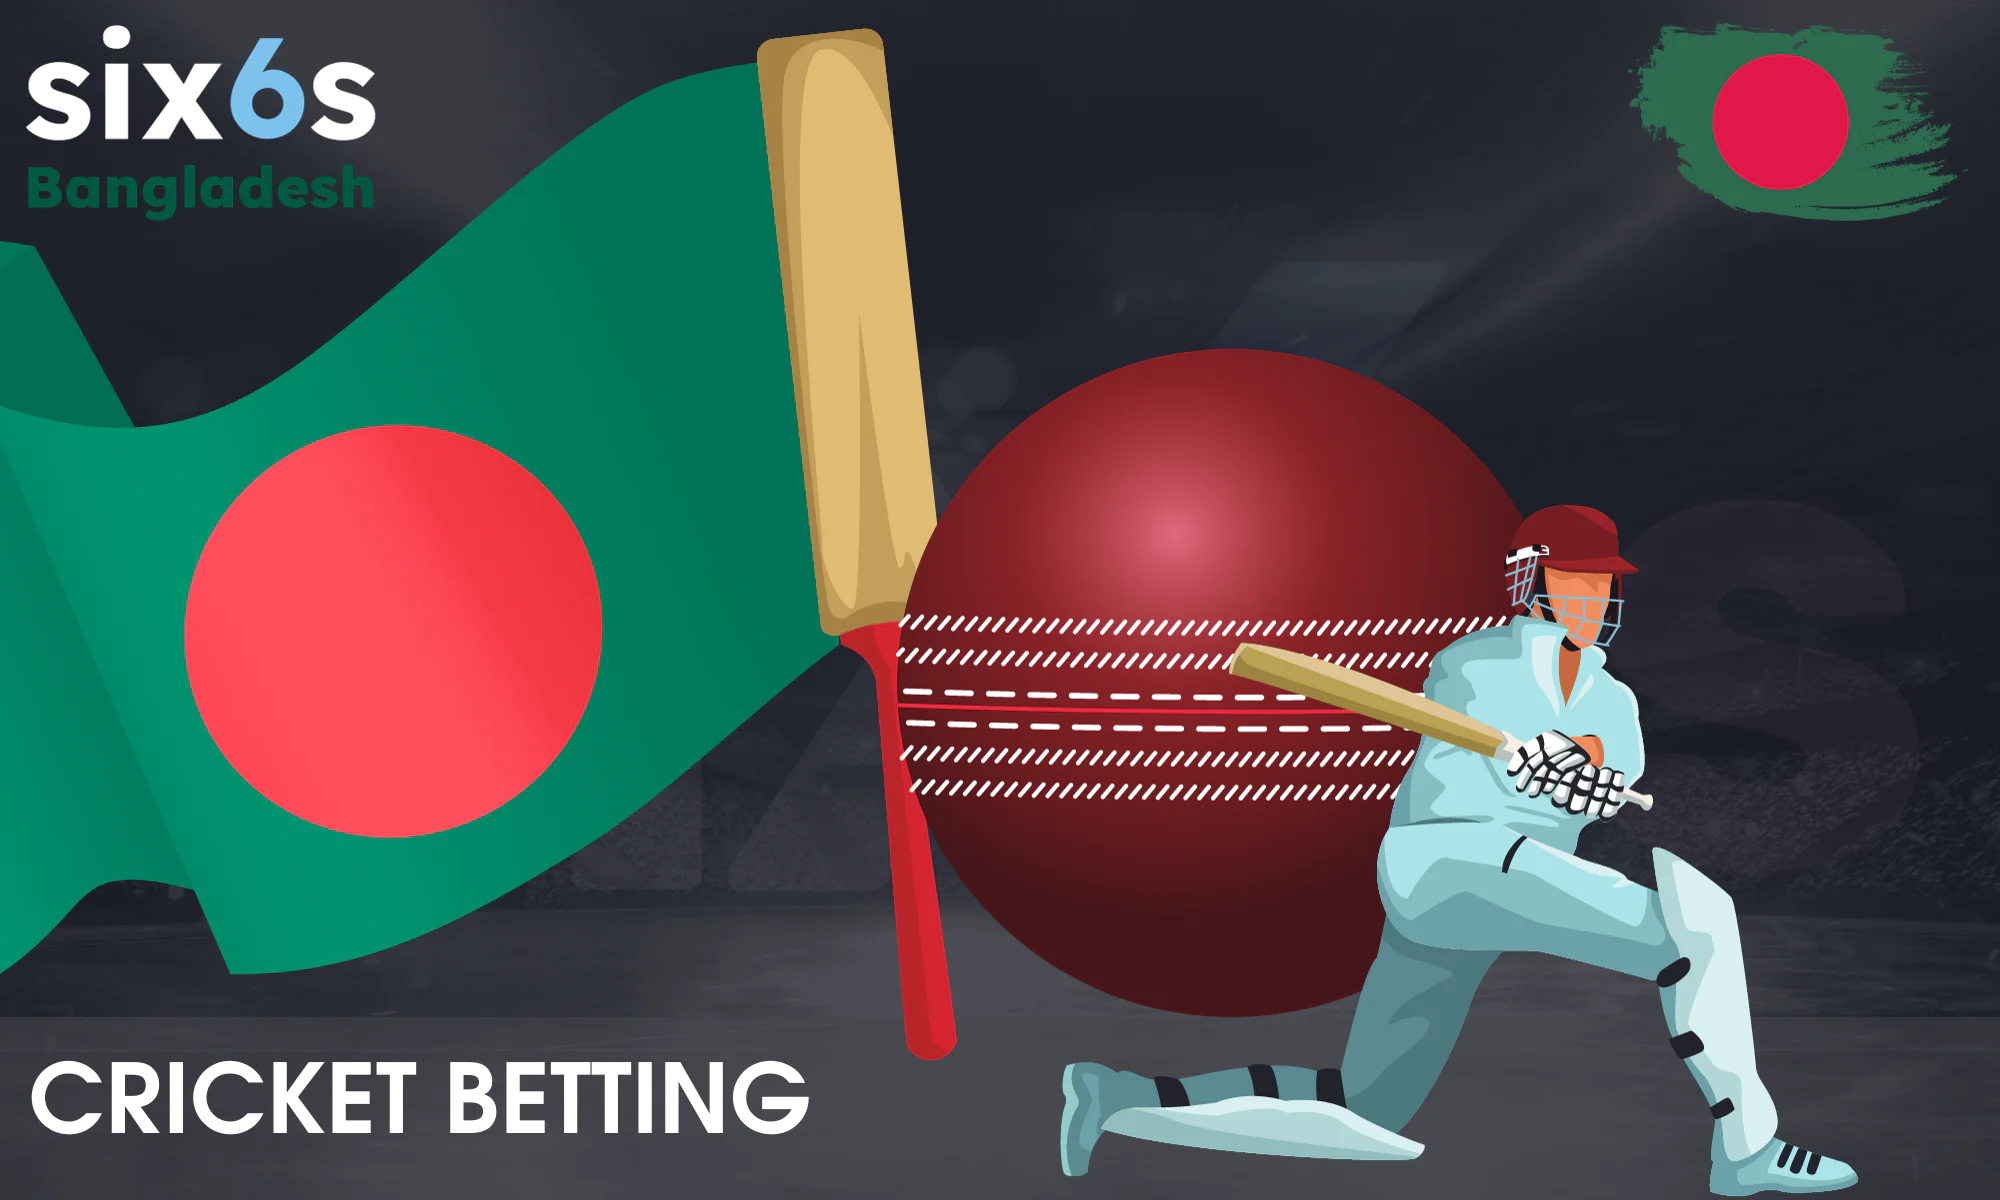 The best odds from Six6s for cricket betting